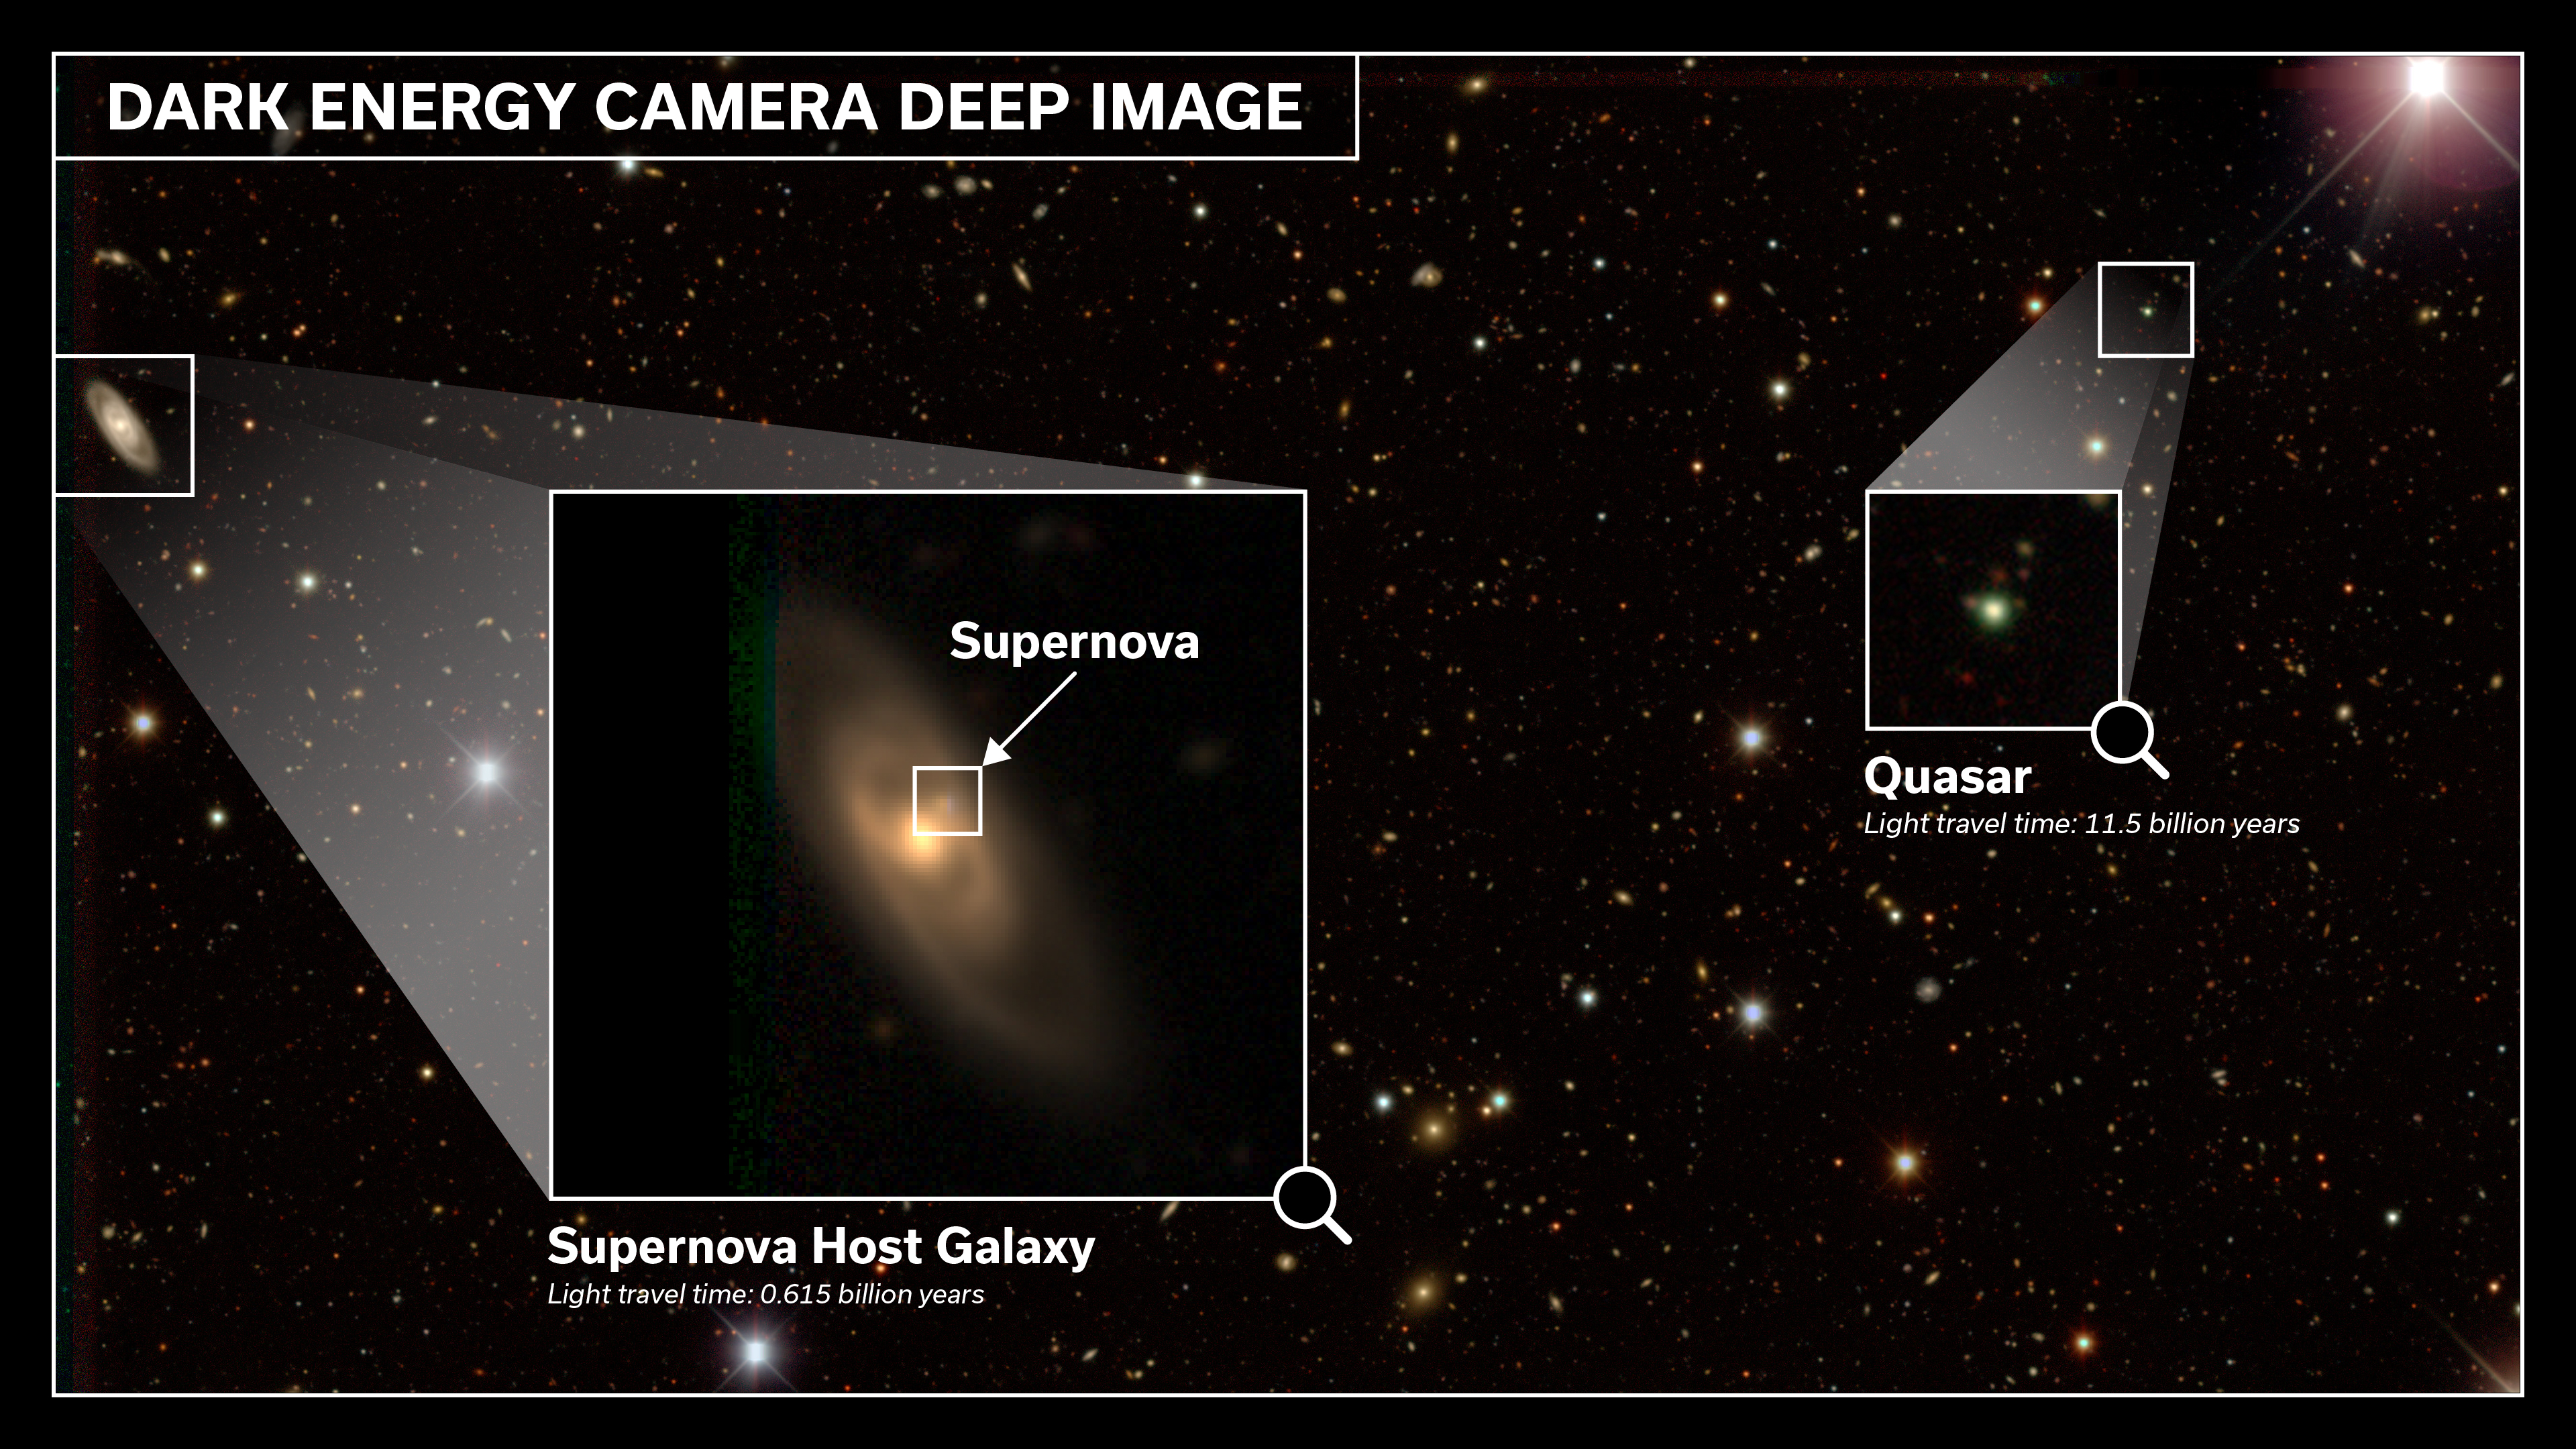 The image is an astrophotography overlay titled "DARK ENERGY CAMERA DEEP IMAGE" highlighting a supernova in its host galaxy and a distant quasar, set against a dense starfield and illustrating the vast timescales of light travel across the universe.